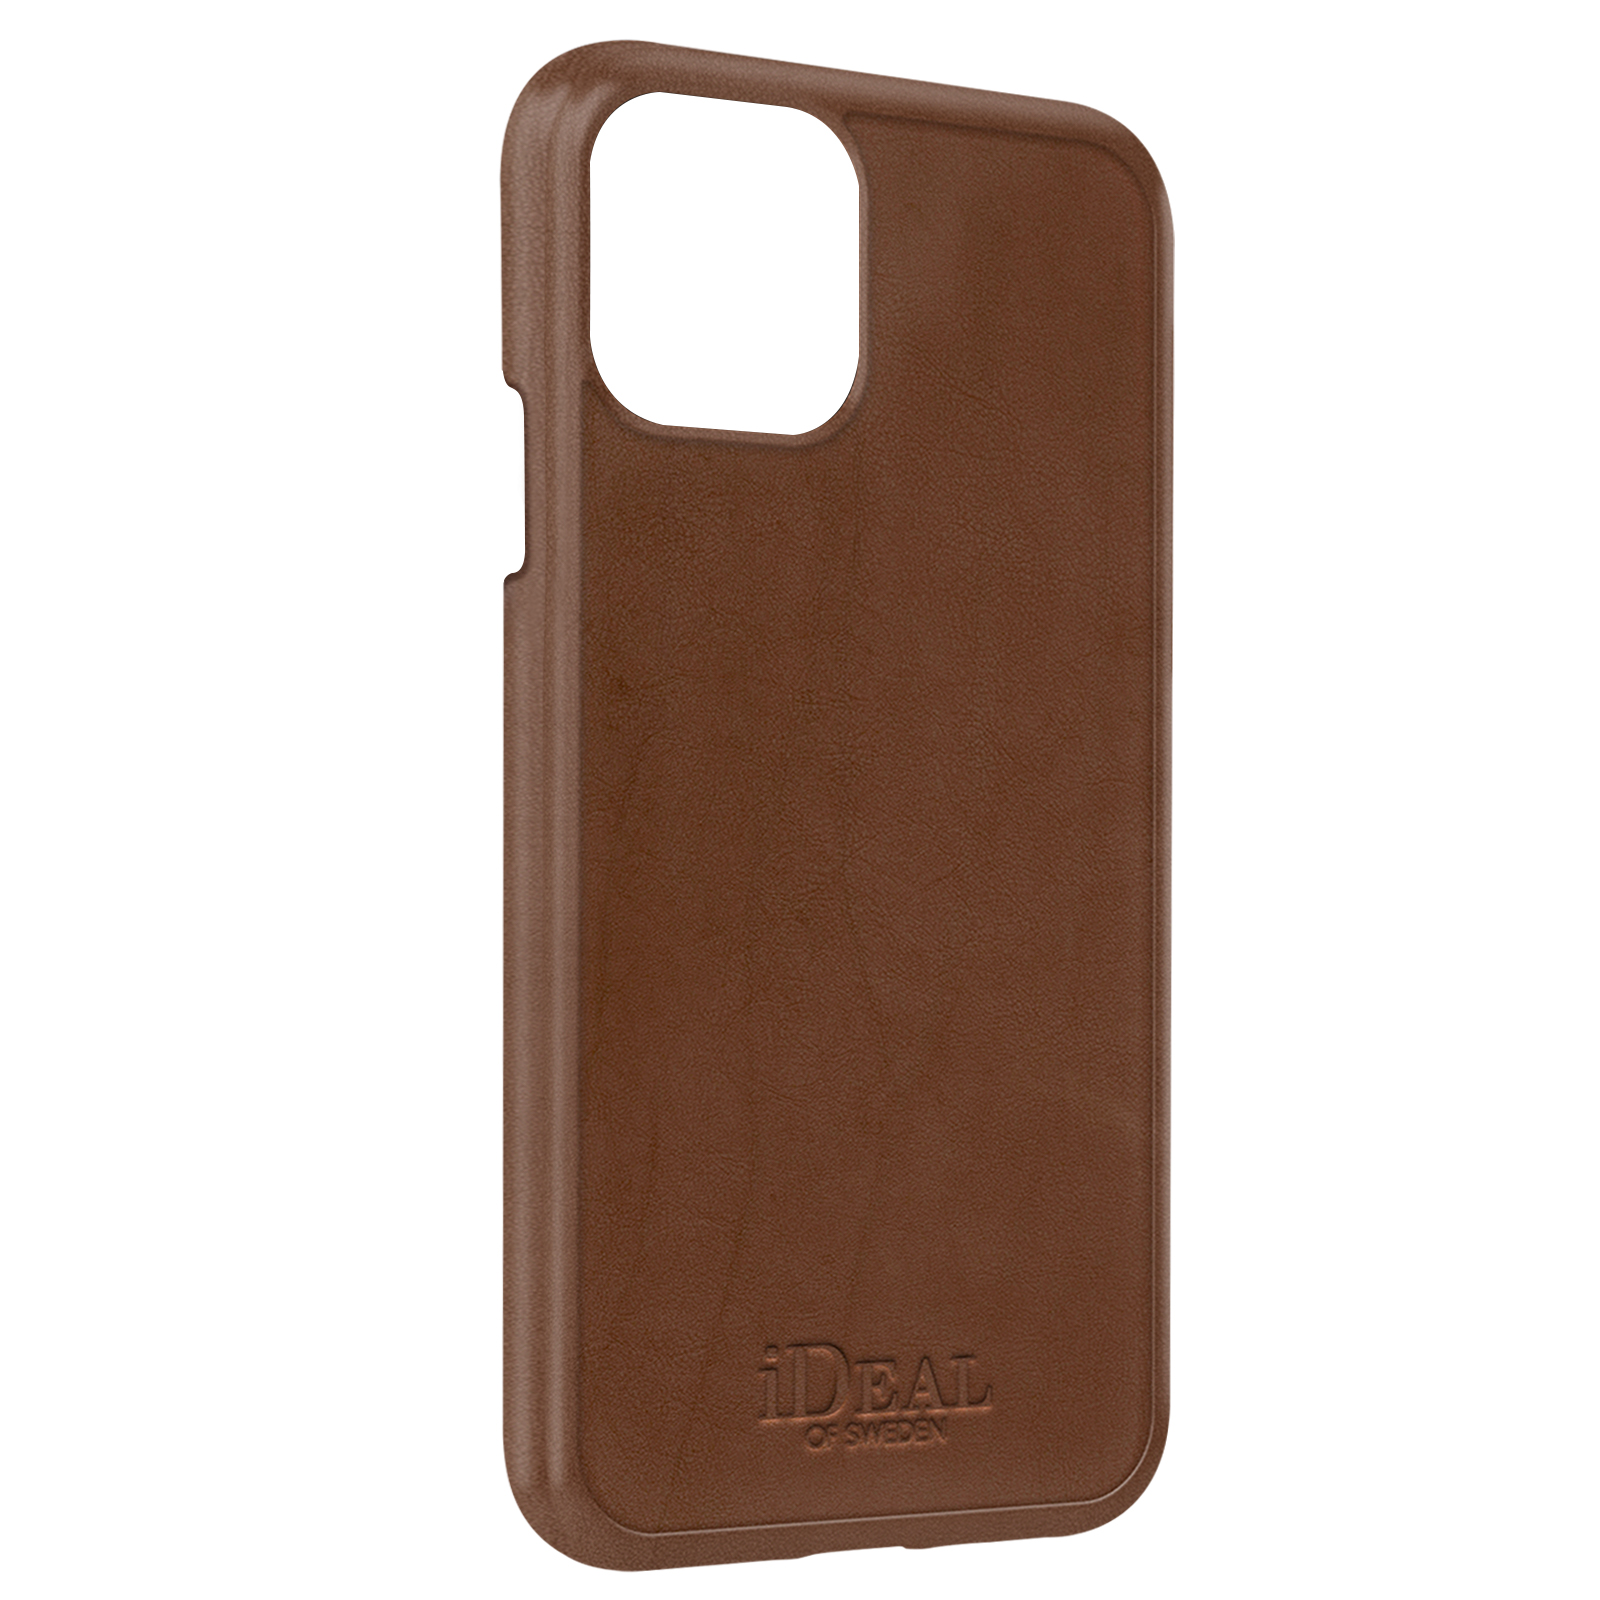 11 SWEDEN Pro, Apple, Backcover, Como Case IDEAL Series, Braun Brown Hülle iPhone OF